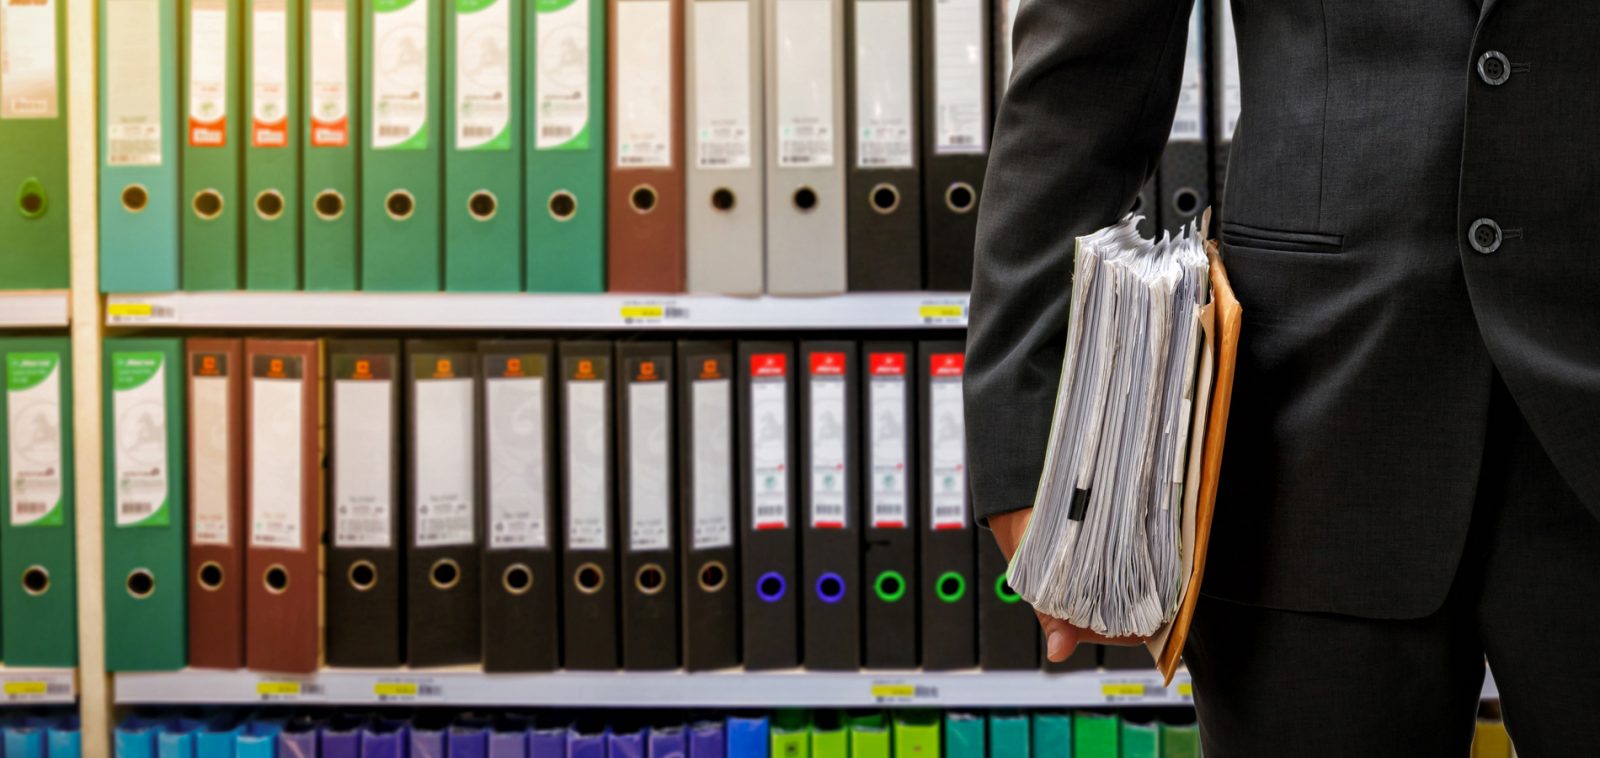 Learn about the importance of record keeping in your classroom.